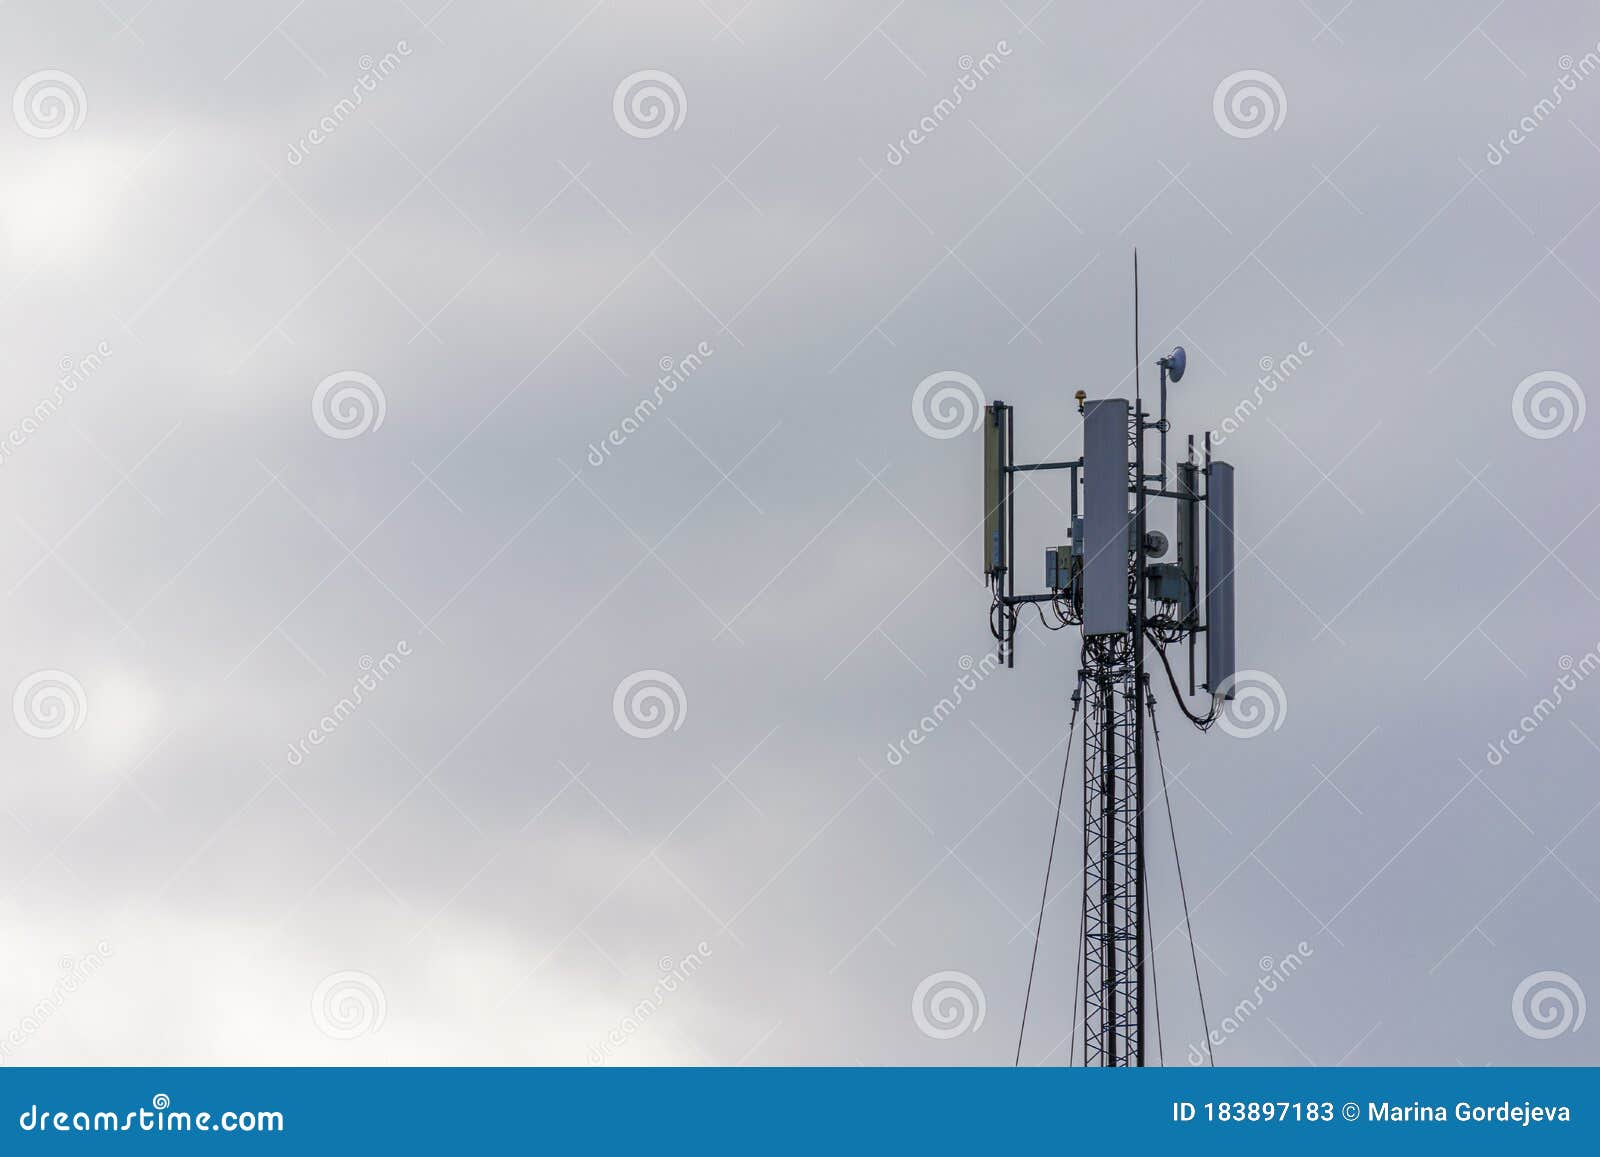 cell phone broadcasting pole. mobile communications metal tower. 5g gsm antenne